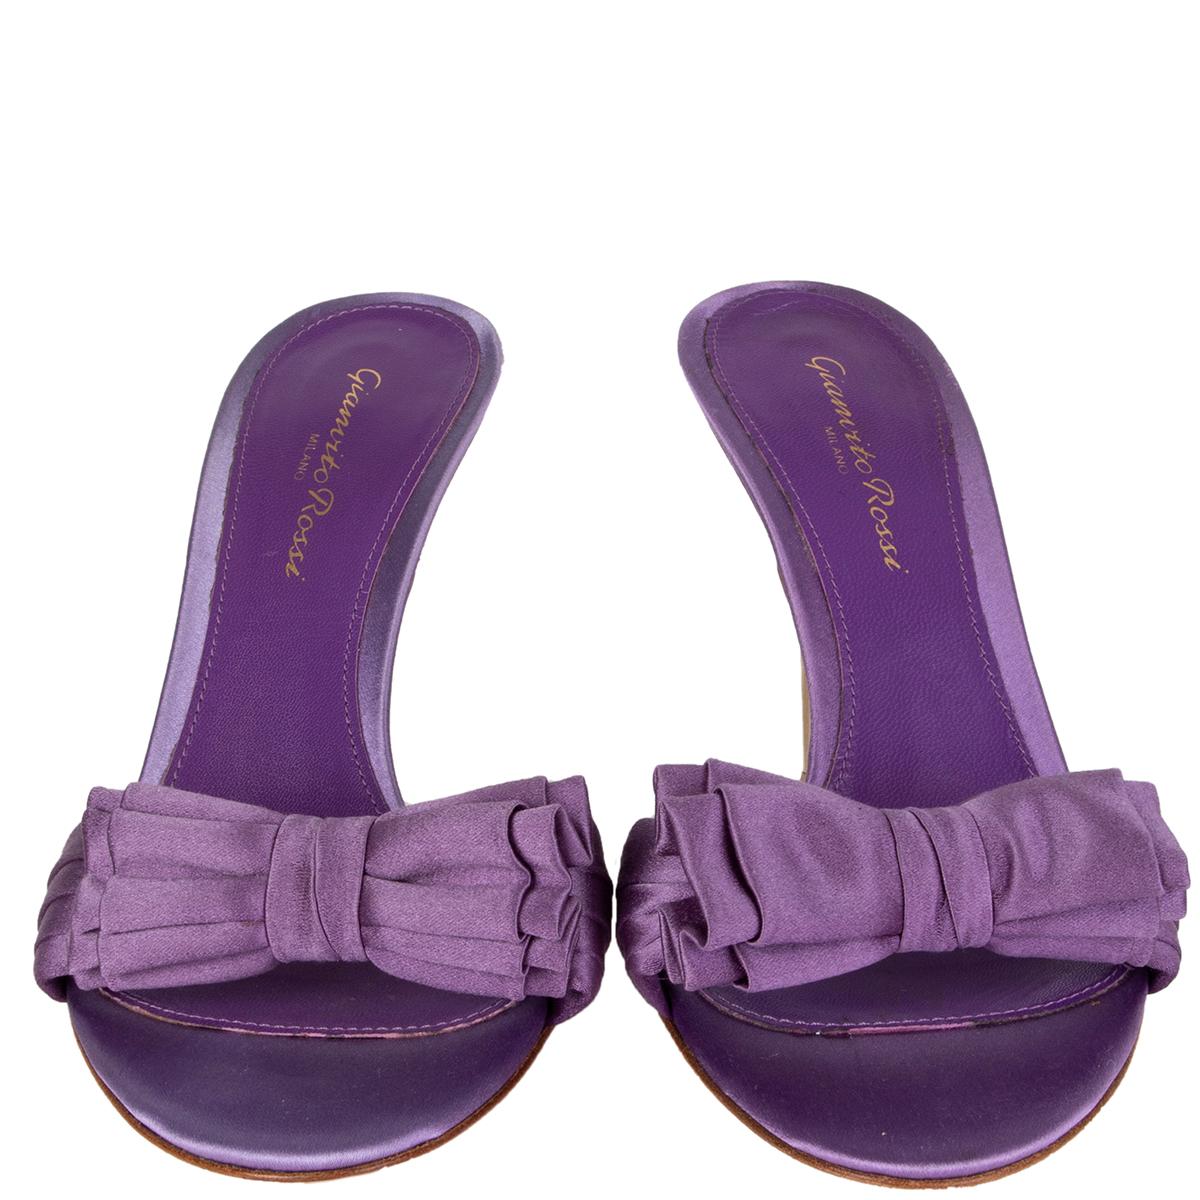 100% authentic Gianvito Rossi mules in lilac satin with bow detail on top. Brand new. 

Measurements
Imprinted Size	37
Shoe Size	37
Inside Sole	24cm (9.4in)
Width	7.5cm (2.9in)
Heel	10cm (3.9in)

All our listings include only the listed item unless